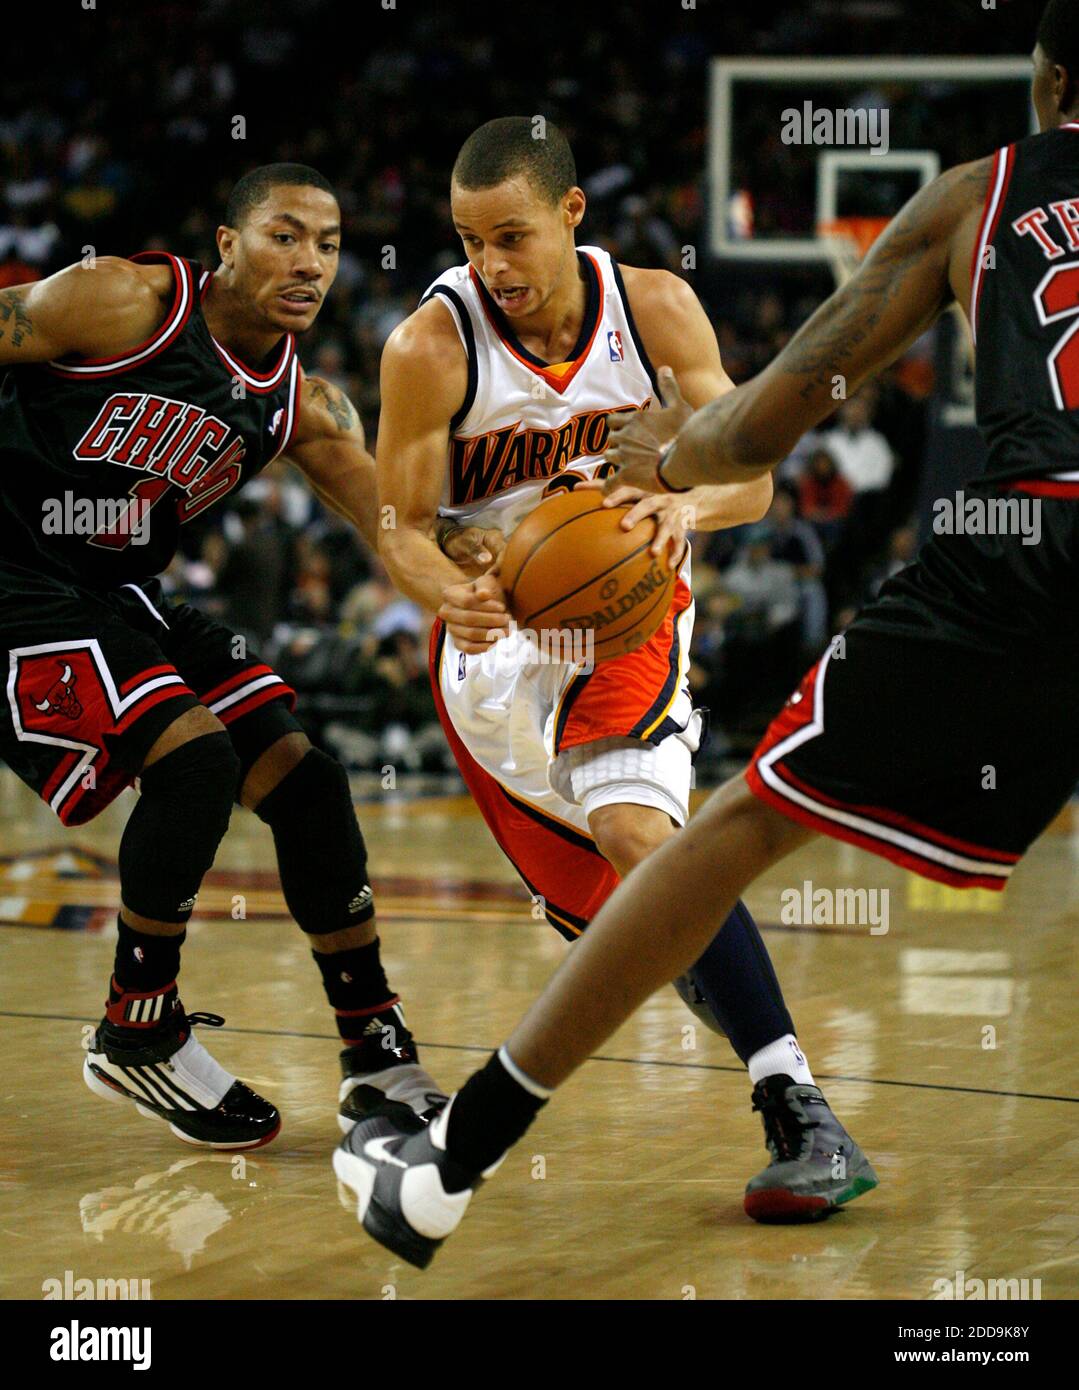 NO FILM, NO VIDEO, NO TV, NO DOCUMENTARY - The Golden State Warriors'  Stephen Curry drives between Chicago Bulls defenders Derrick Rose, left,  and Tyrus Thomas during the first quarter at Oracle